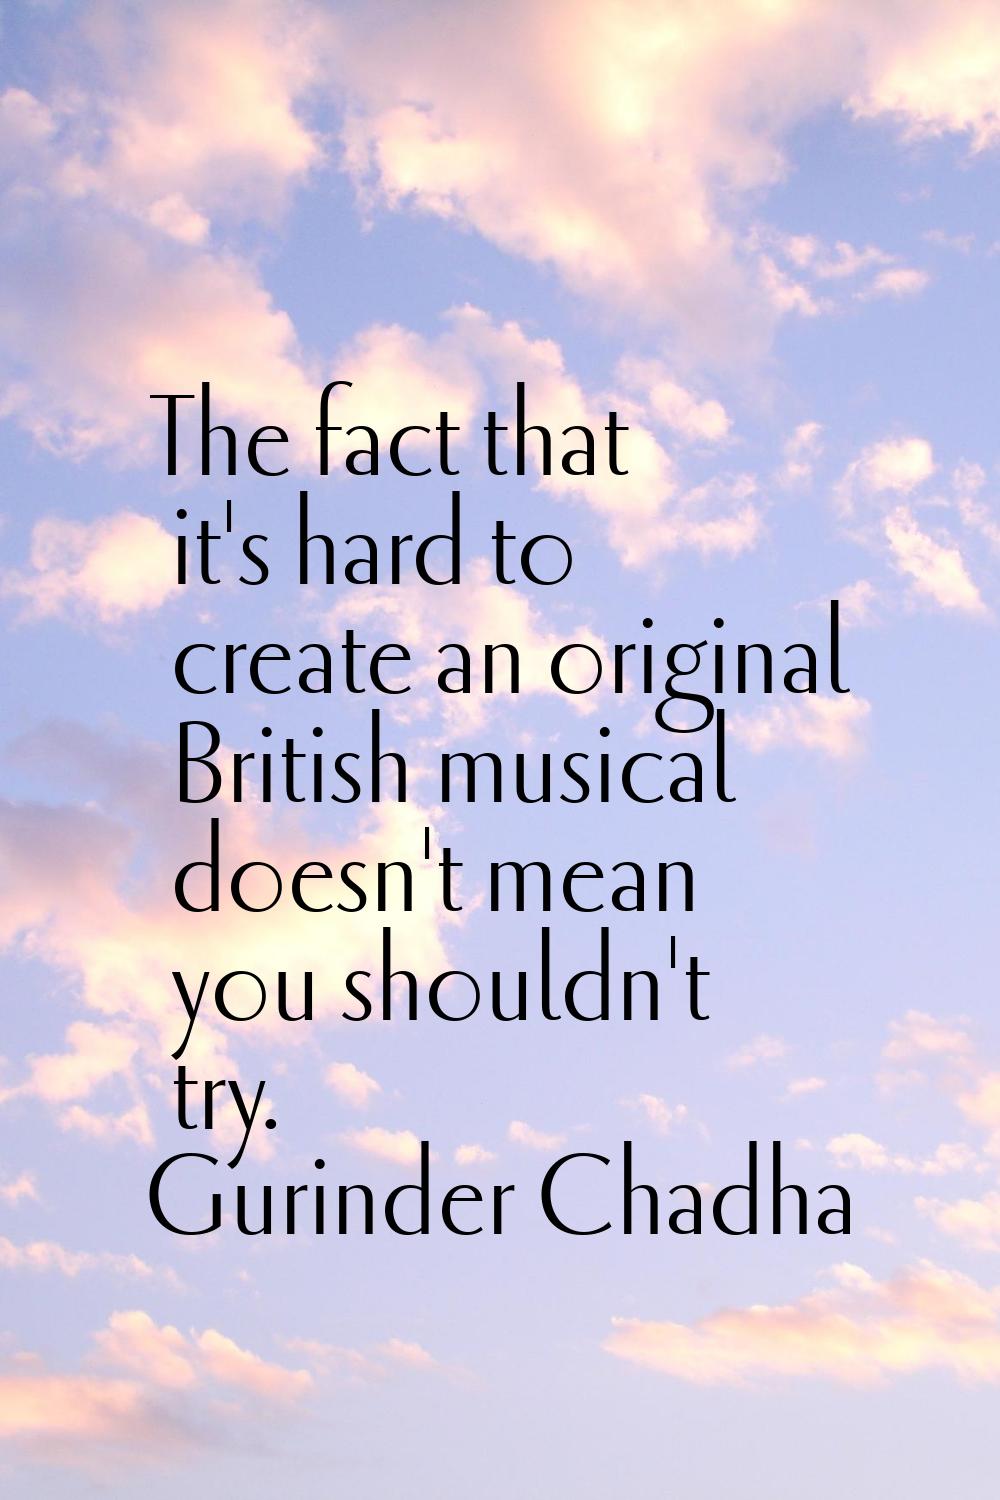 The fact that it's hard to create an original British musical doesn't mean you shouldn't try.